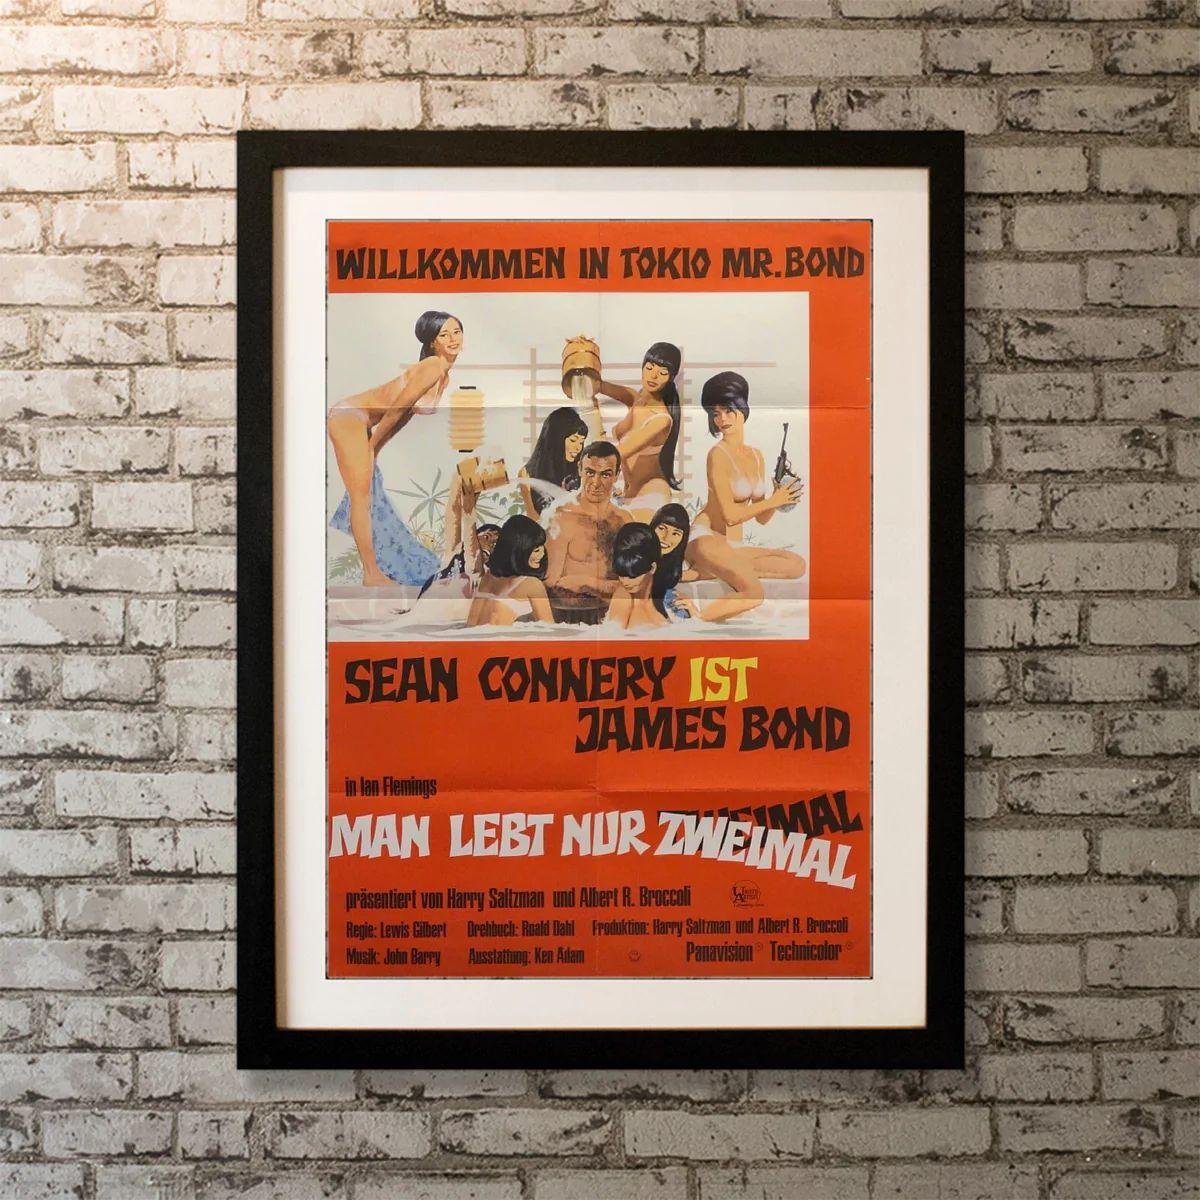 You Only Live Twice, unframed poster, 1967

Original German Plakat (23 X 33 Inches). James Bond and the Japanese Secret Service must find and stop the true culprit of a series of space hijackings, before war is provoked between Russia and the